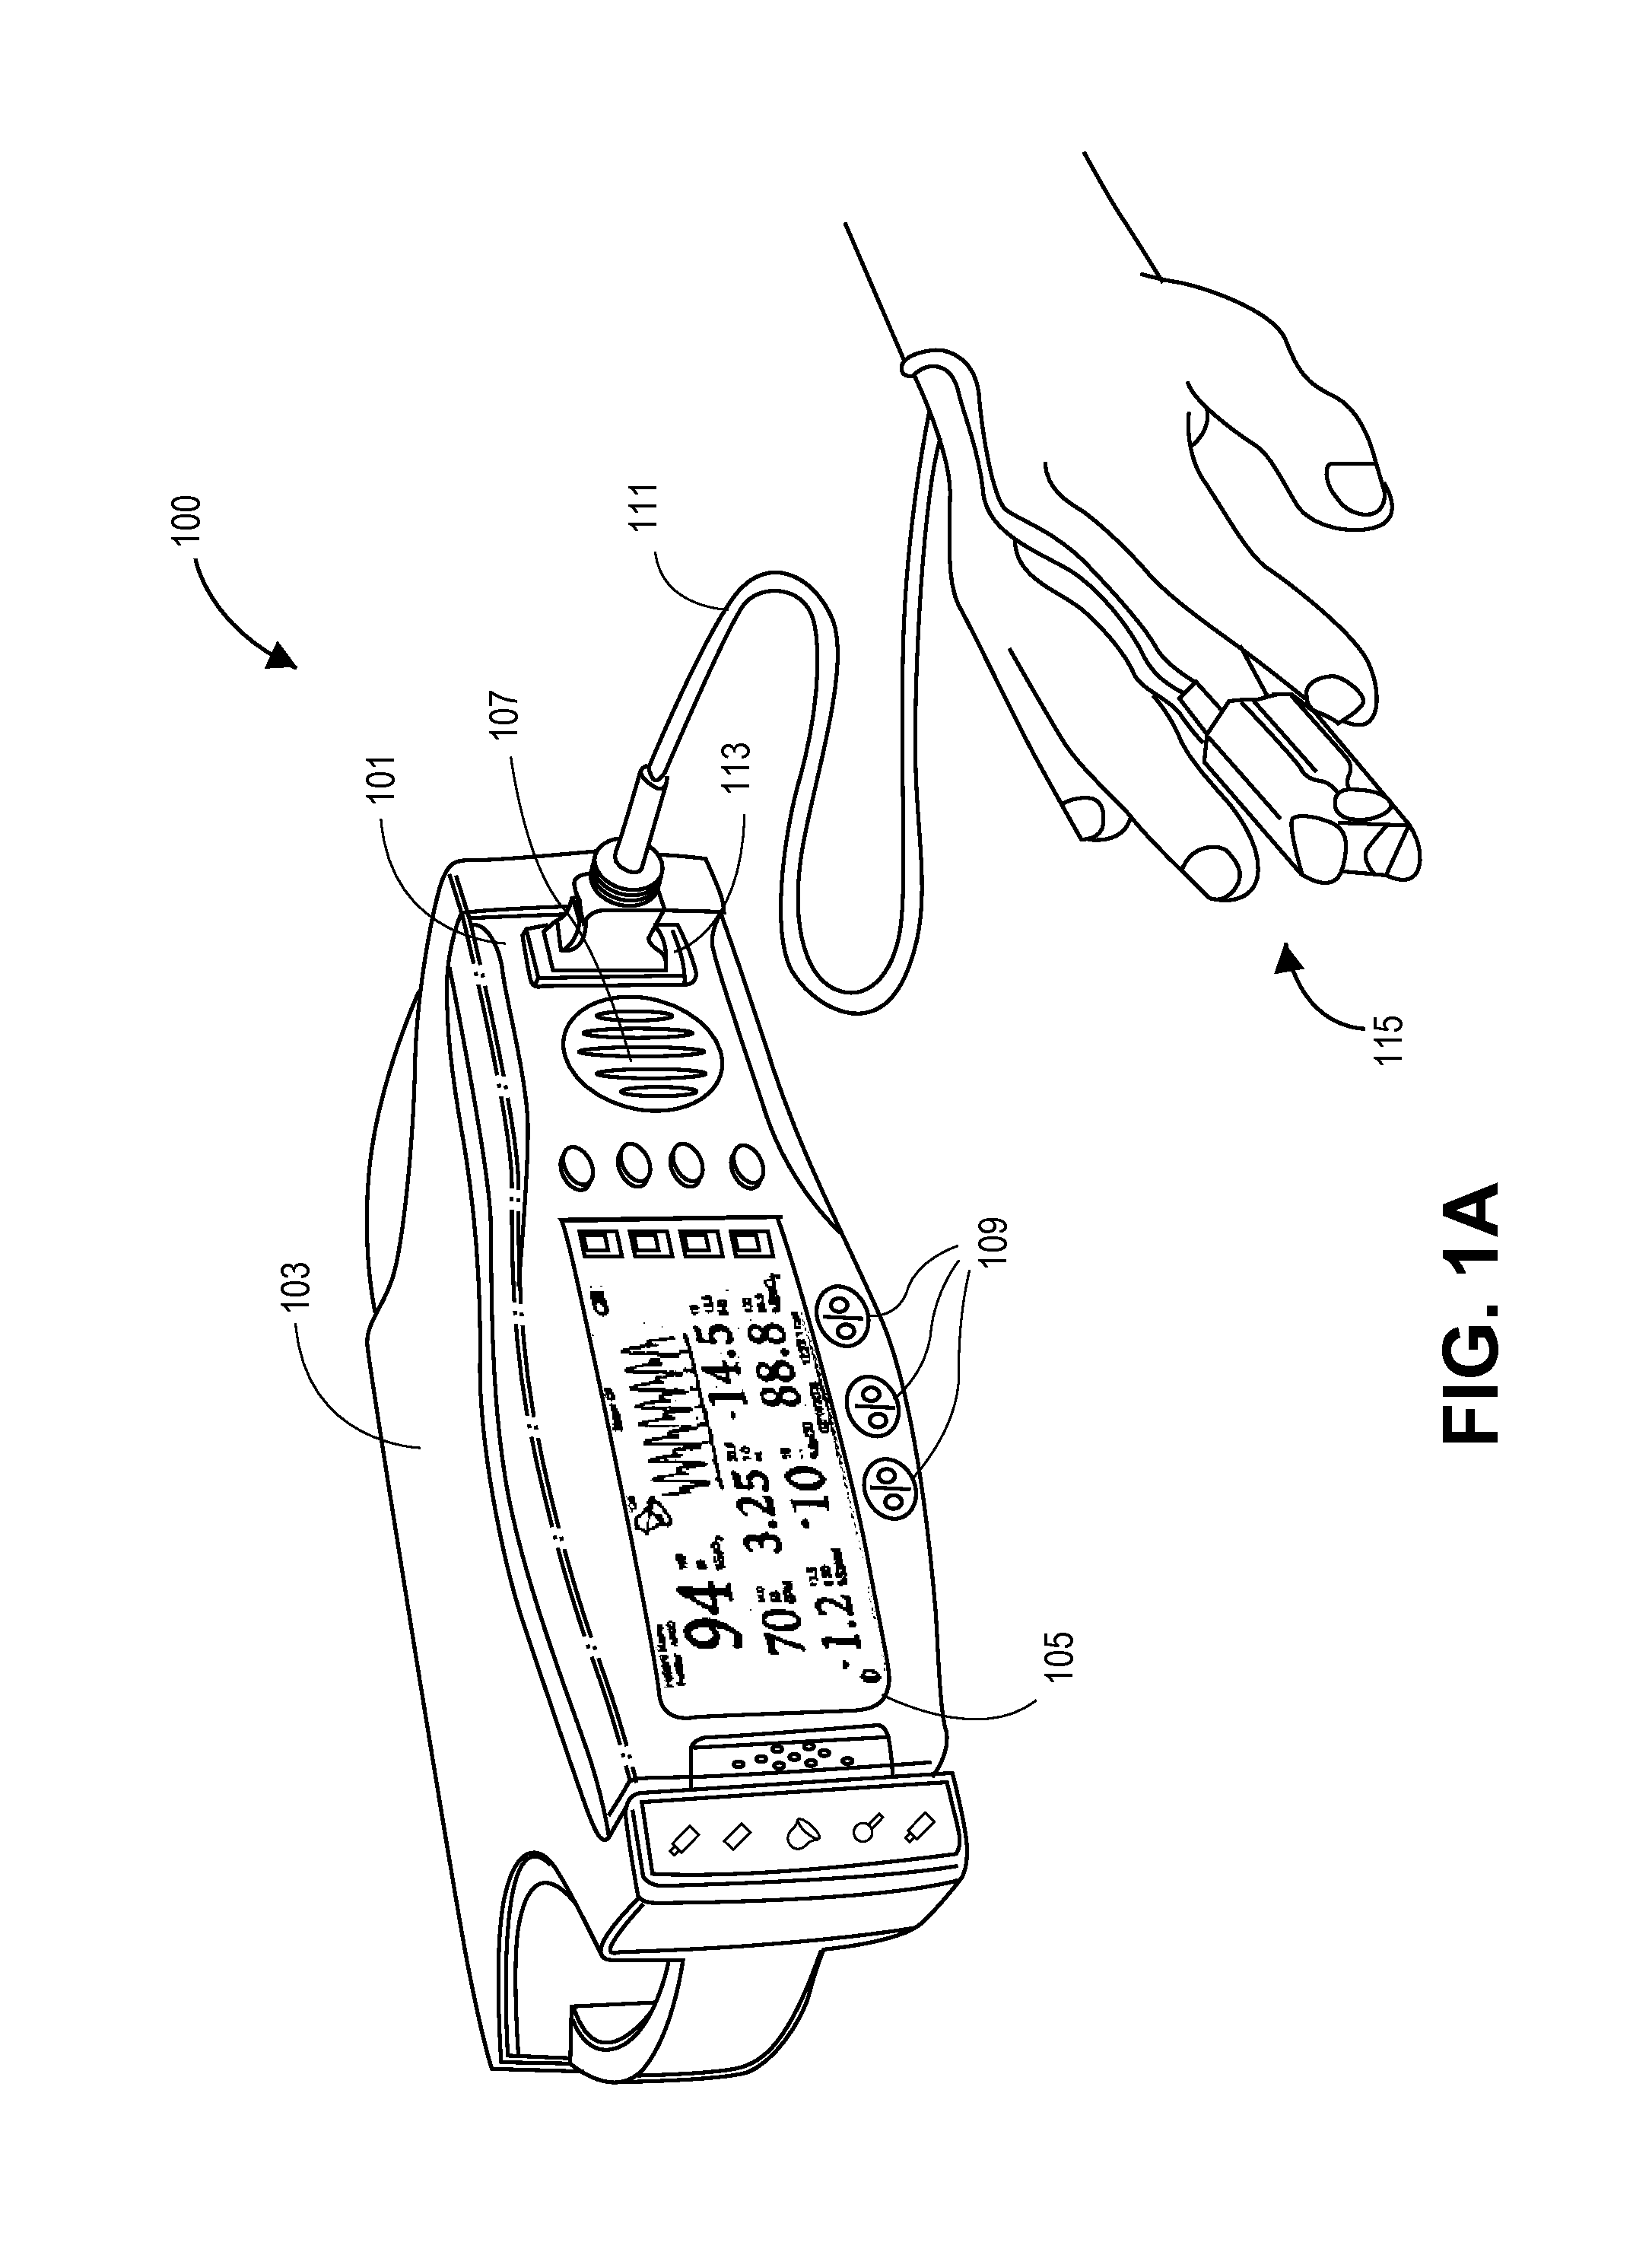 Low noise cable providing communication between electronic sensor components and patient monitor